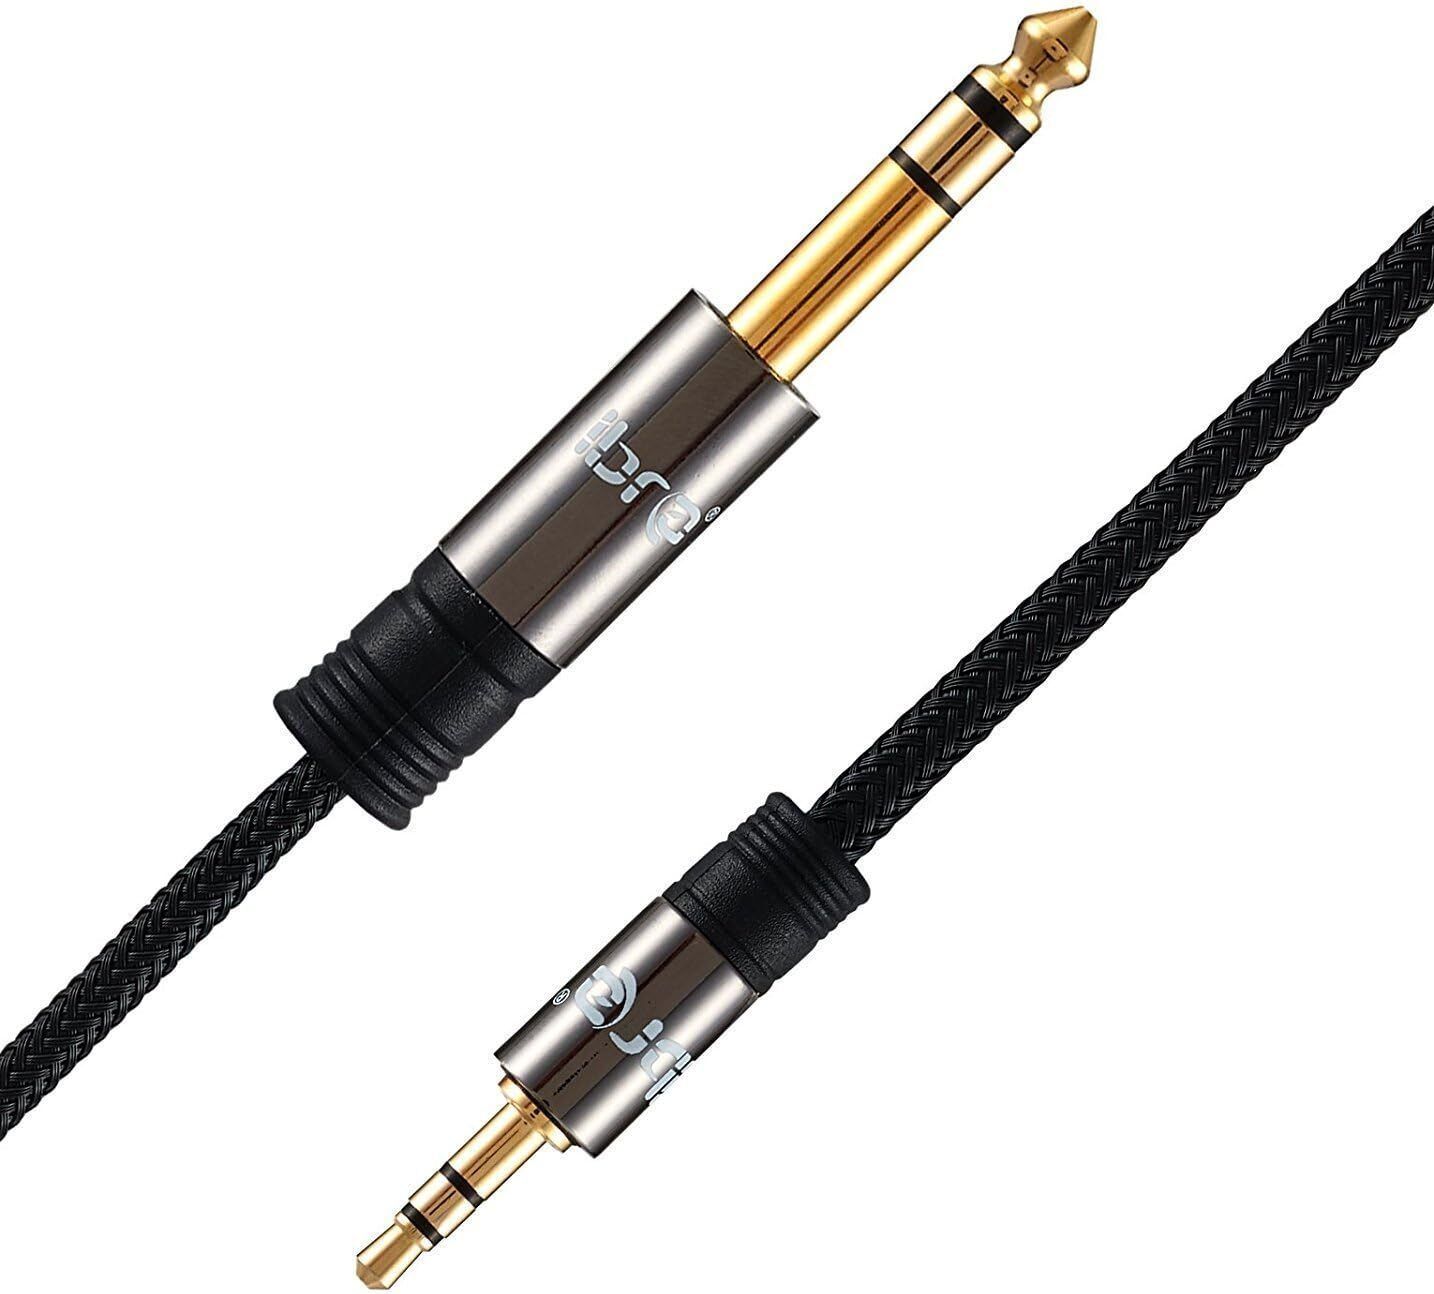 3.5mm to 6.35mm 1/4 inch Small to Big Mono Jack Audio Cable Plug Patch Lead Amp - 5M